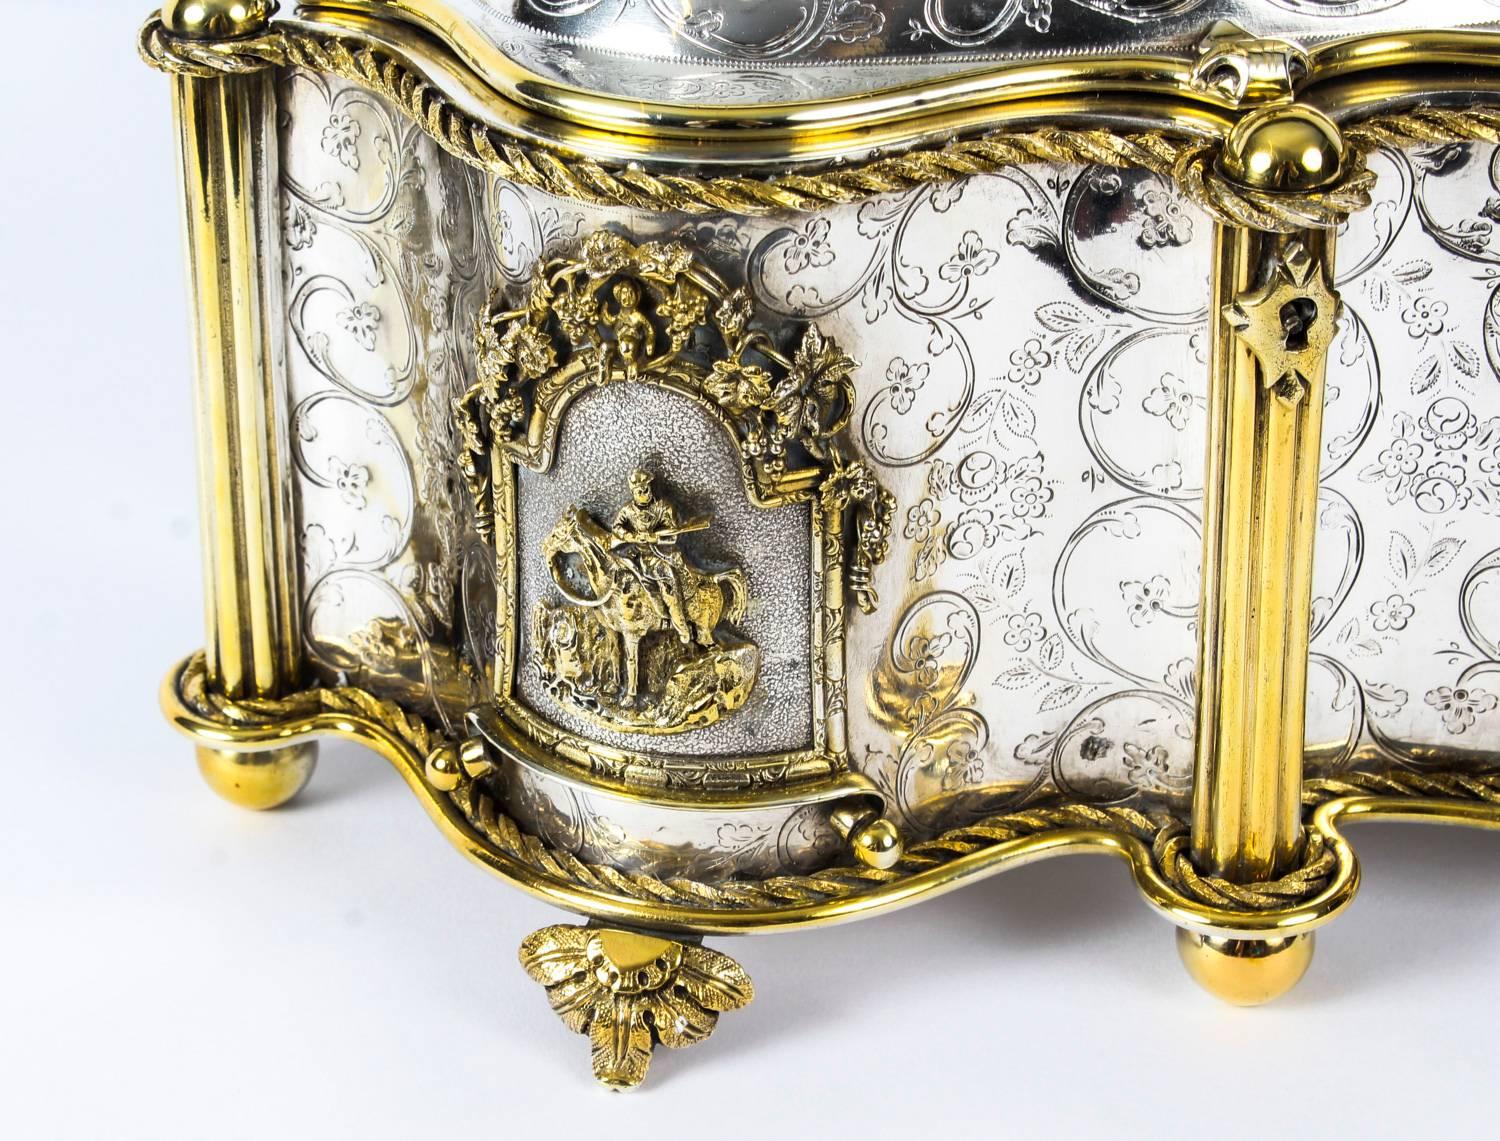 Antique Large French Gold and Silver Plated Oval Casket 19th Century 1